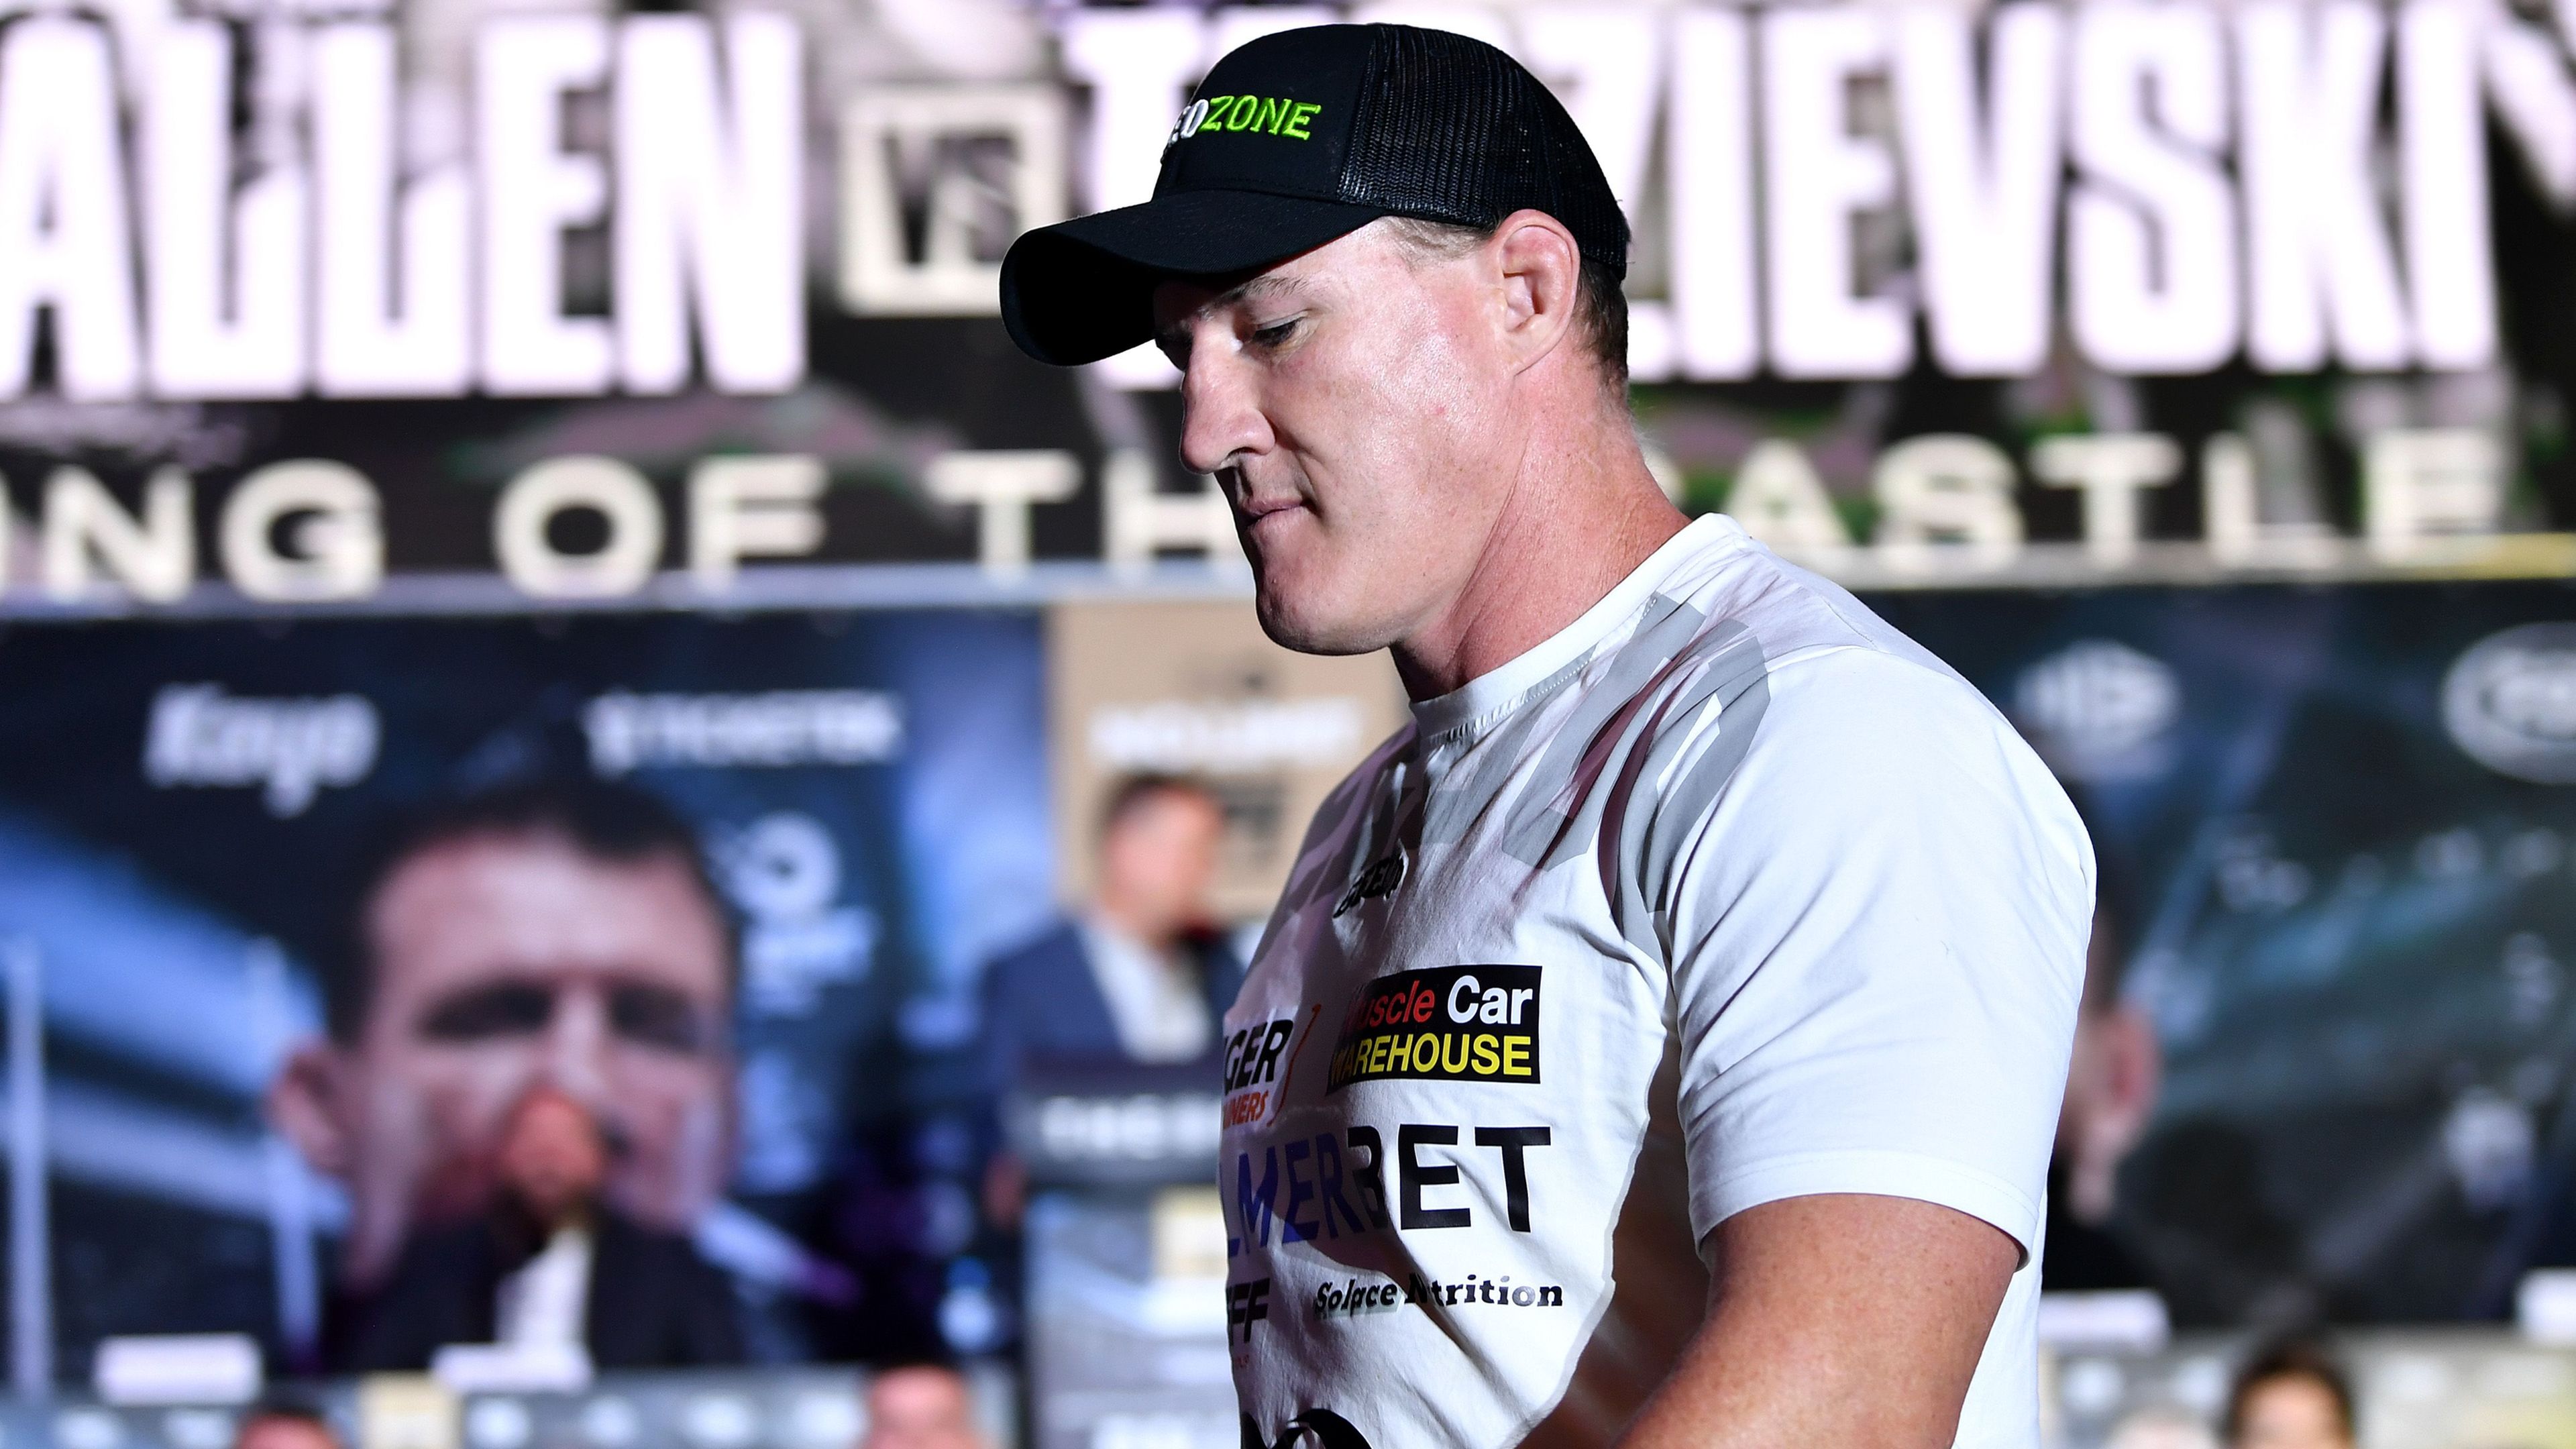 Paul Gallen blasts Kris Terzievksi's lack of promotion, storms out of press conference